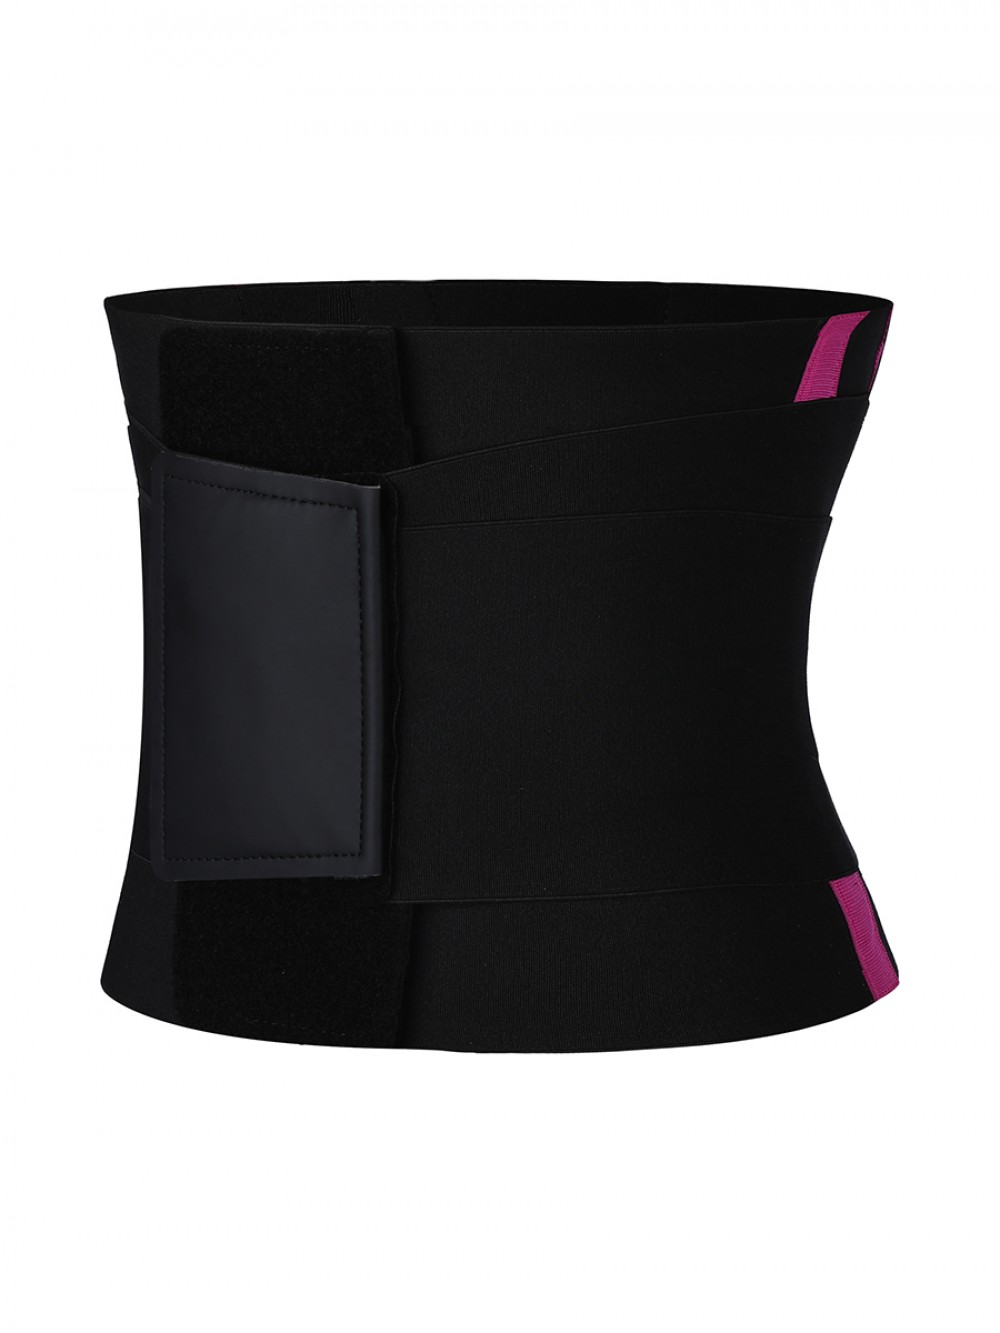 Rose Red Contrast Color Plus Waist Trainer With Straps Posture Correction